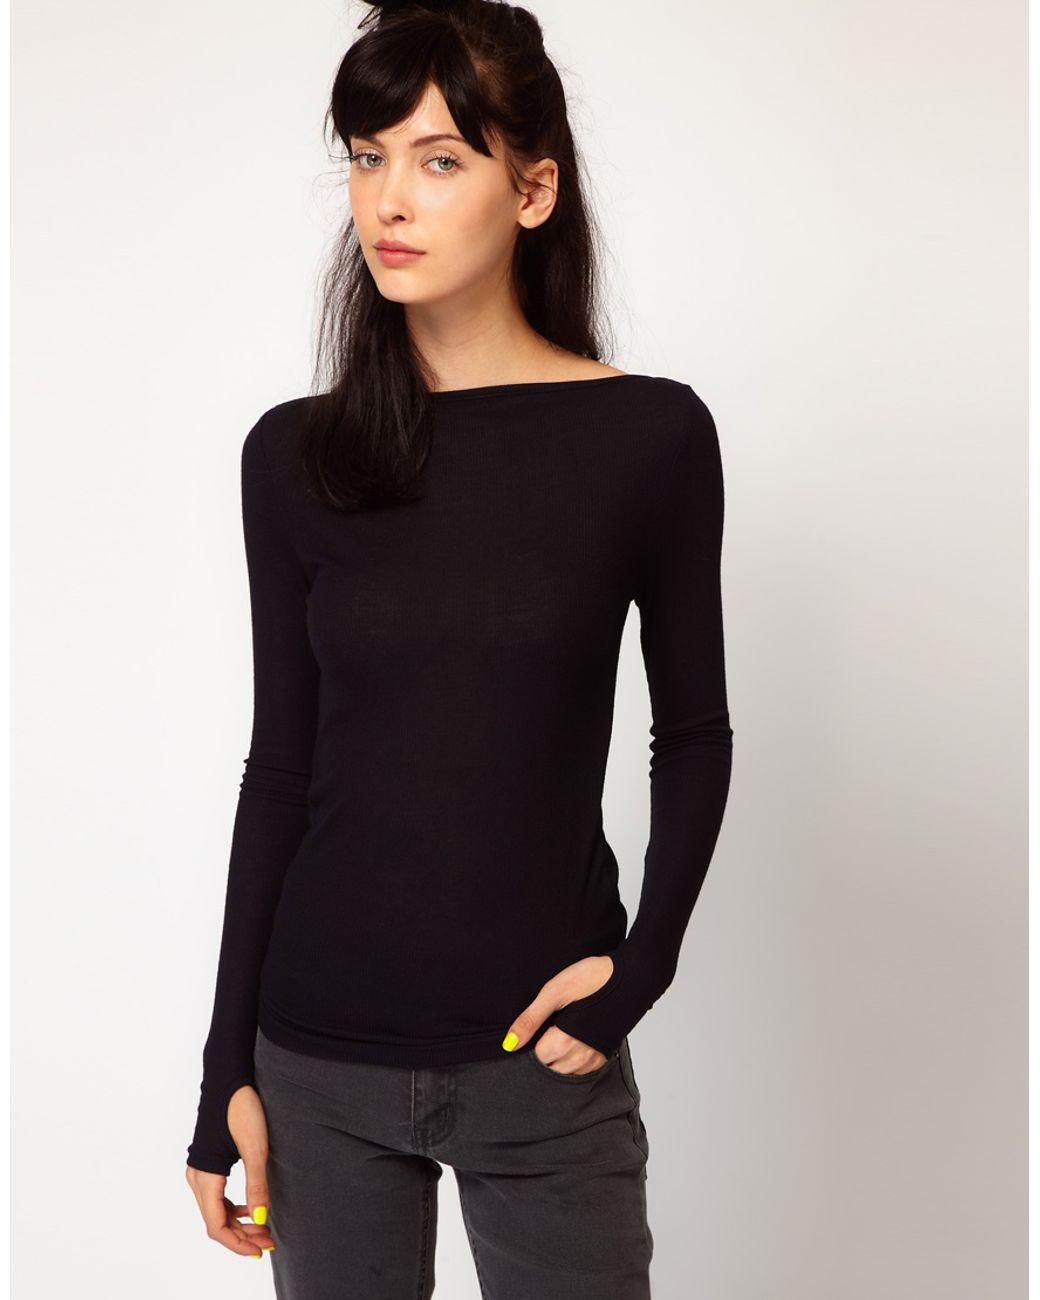 Cheap Monday Long Sleeve Top with Slash Neck and Thumb Holes in Black | Lyst